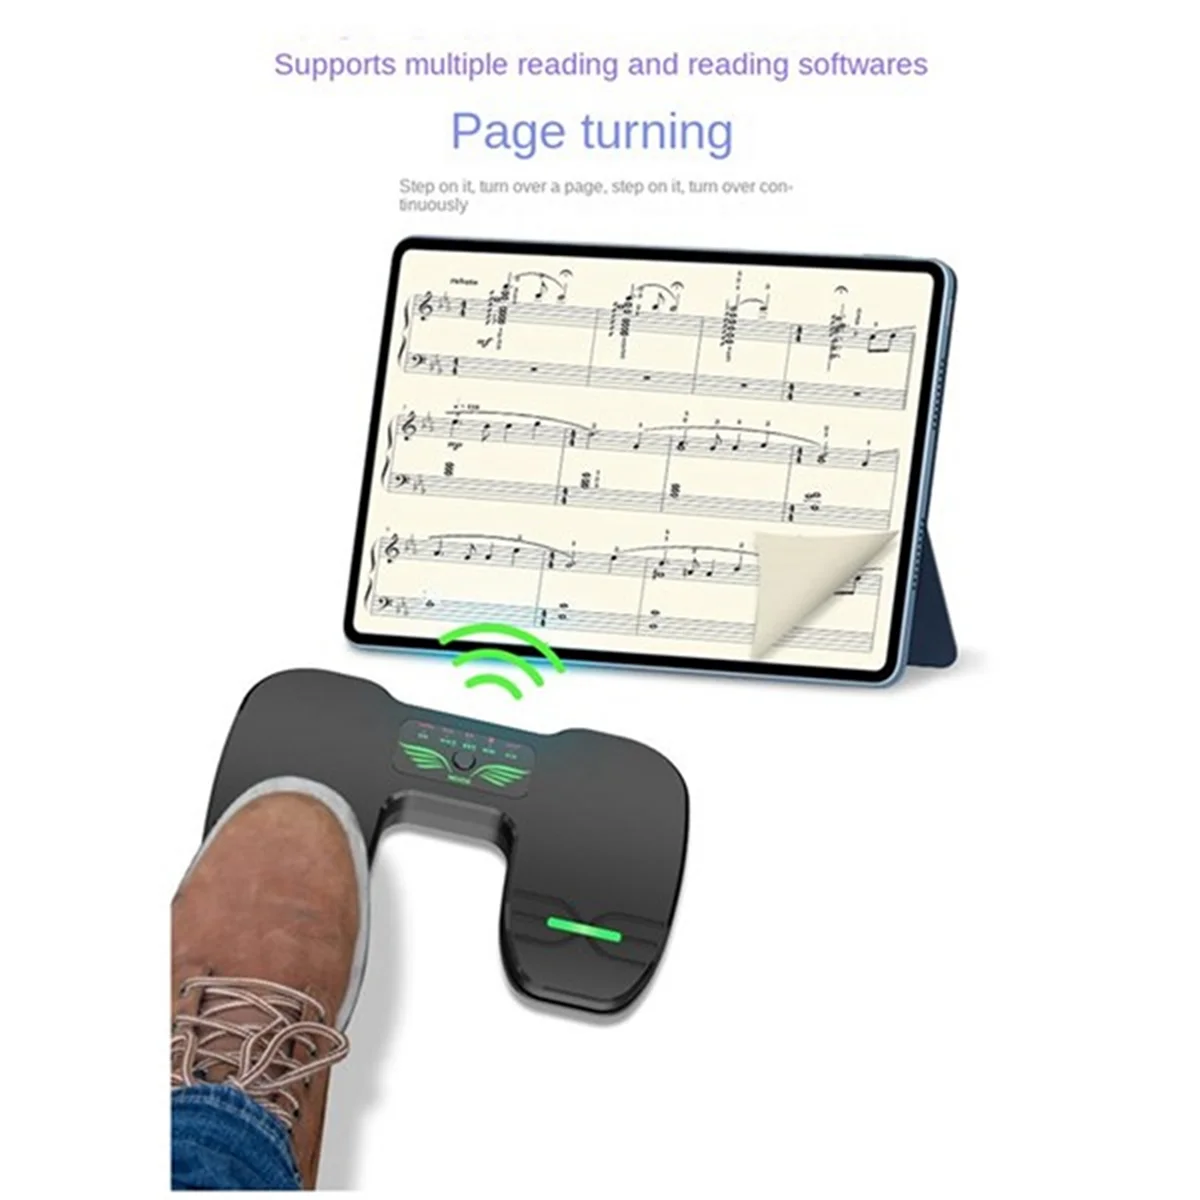 

Wireless Foot Pedal Double Switch Music Page Turner Silent Foot Pedal for Tablets Smartphones Anti-Skid